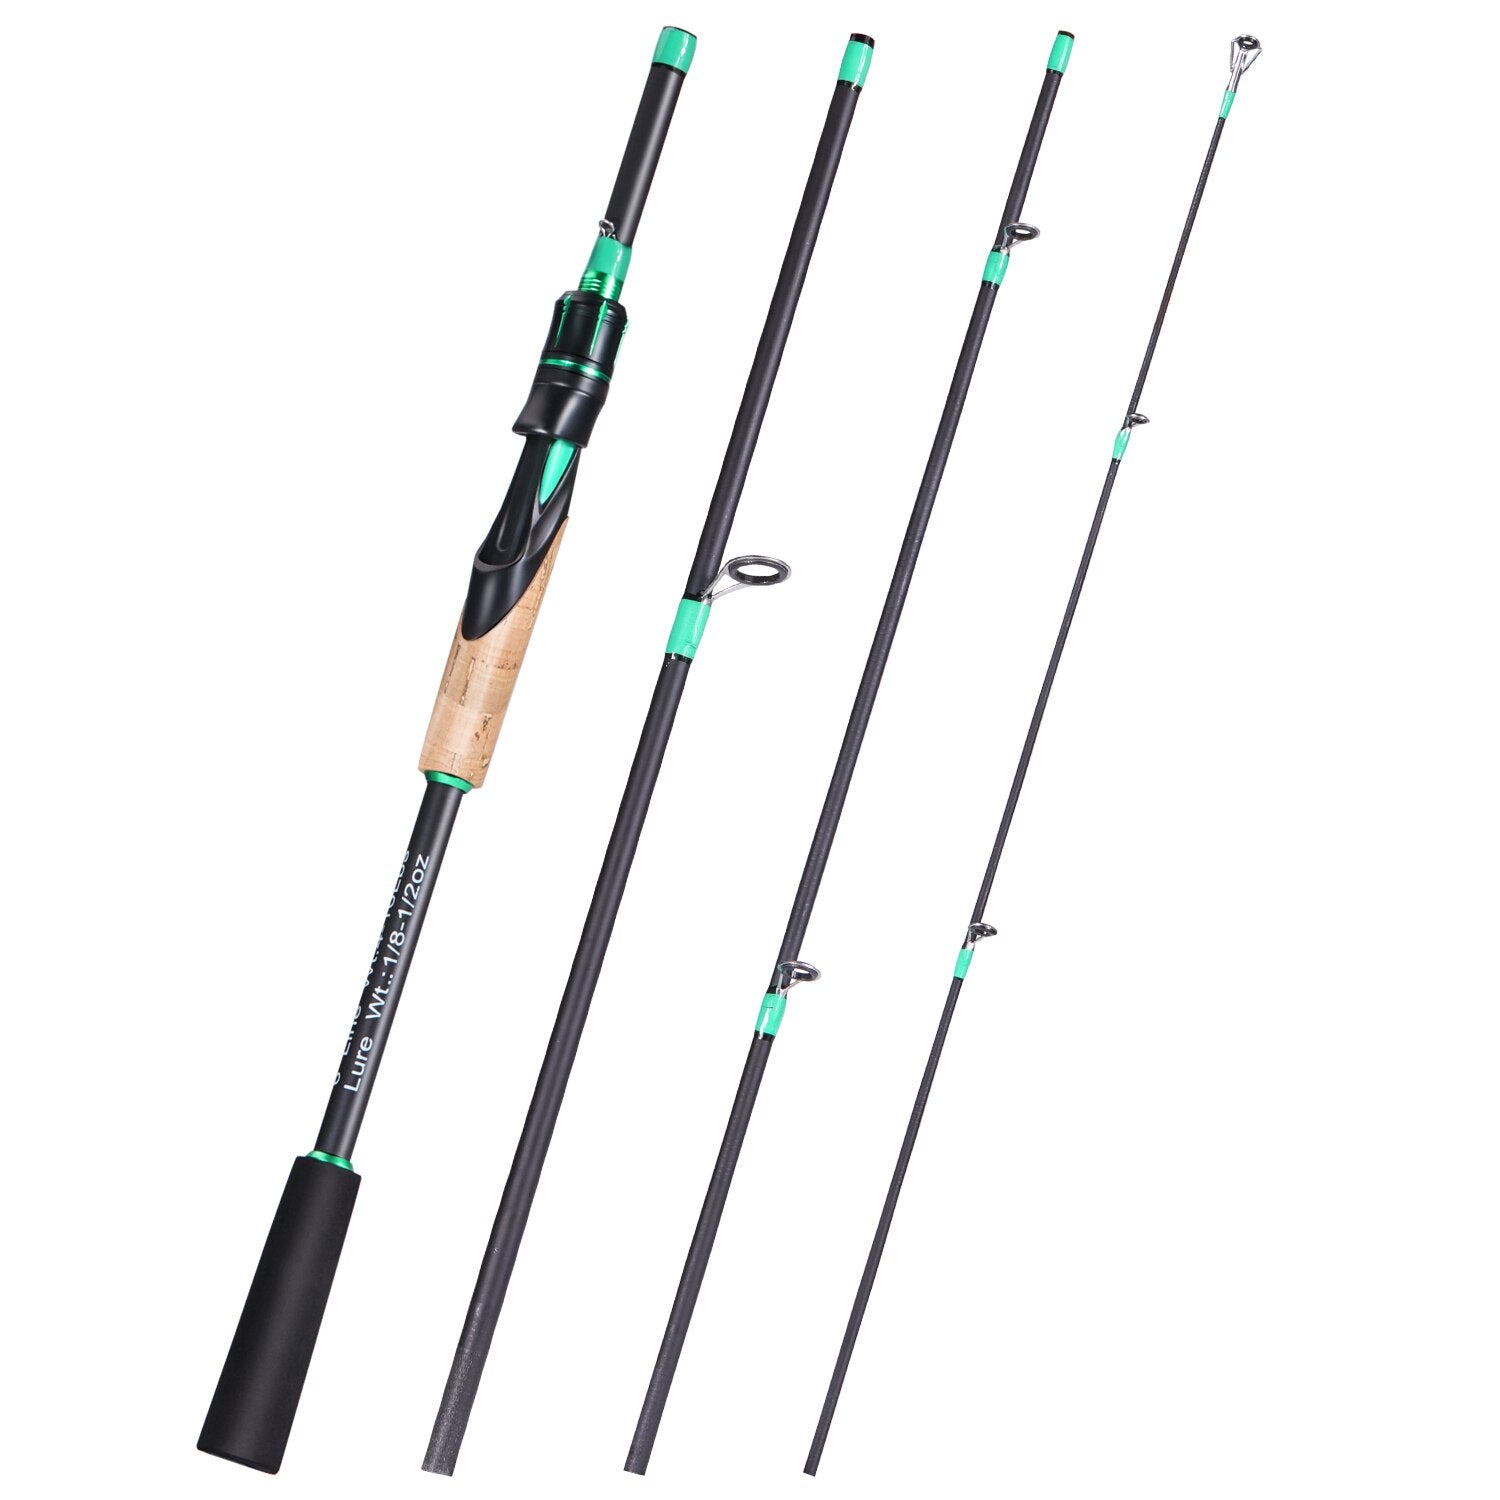  HNHYNSY Ultralight Portable Fishing Rod ，3 Sections